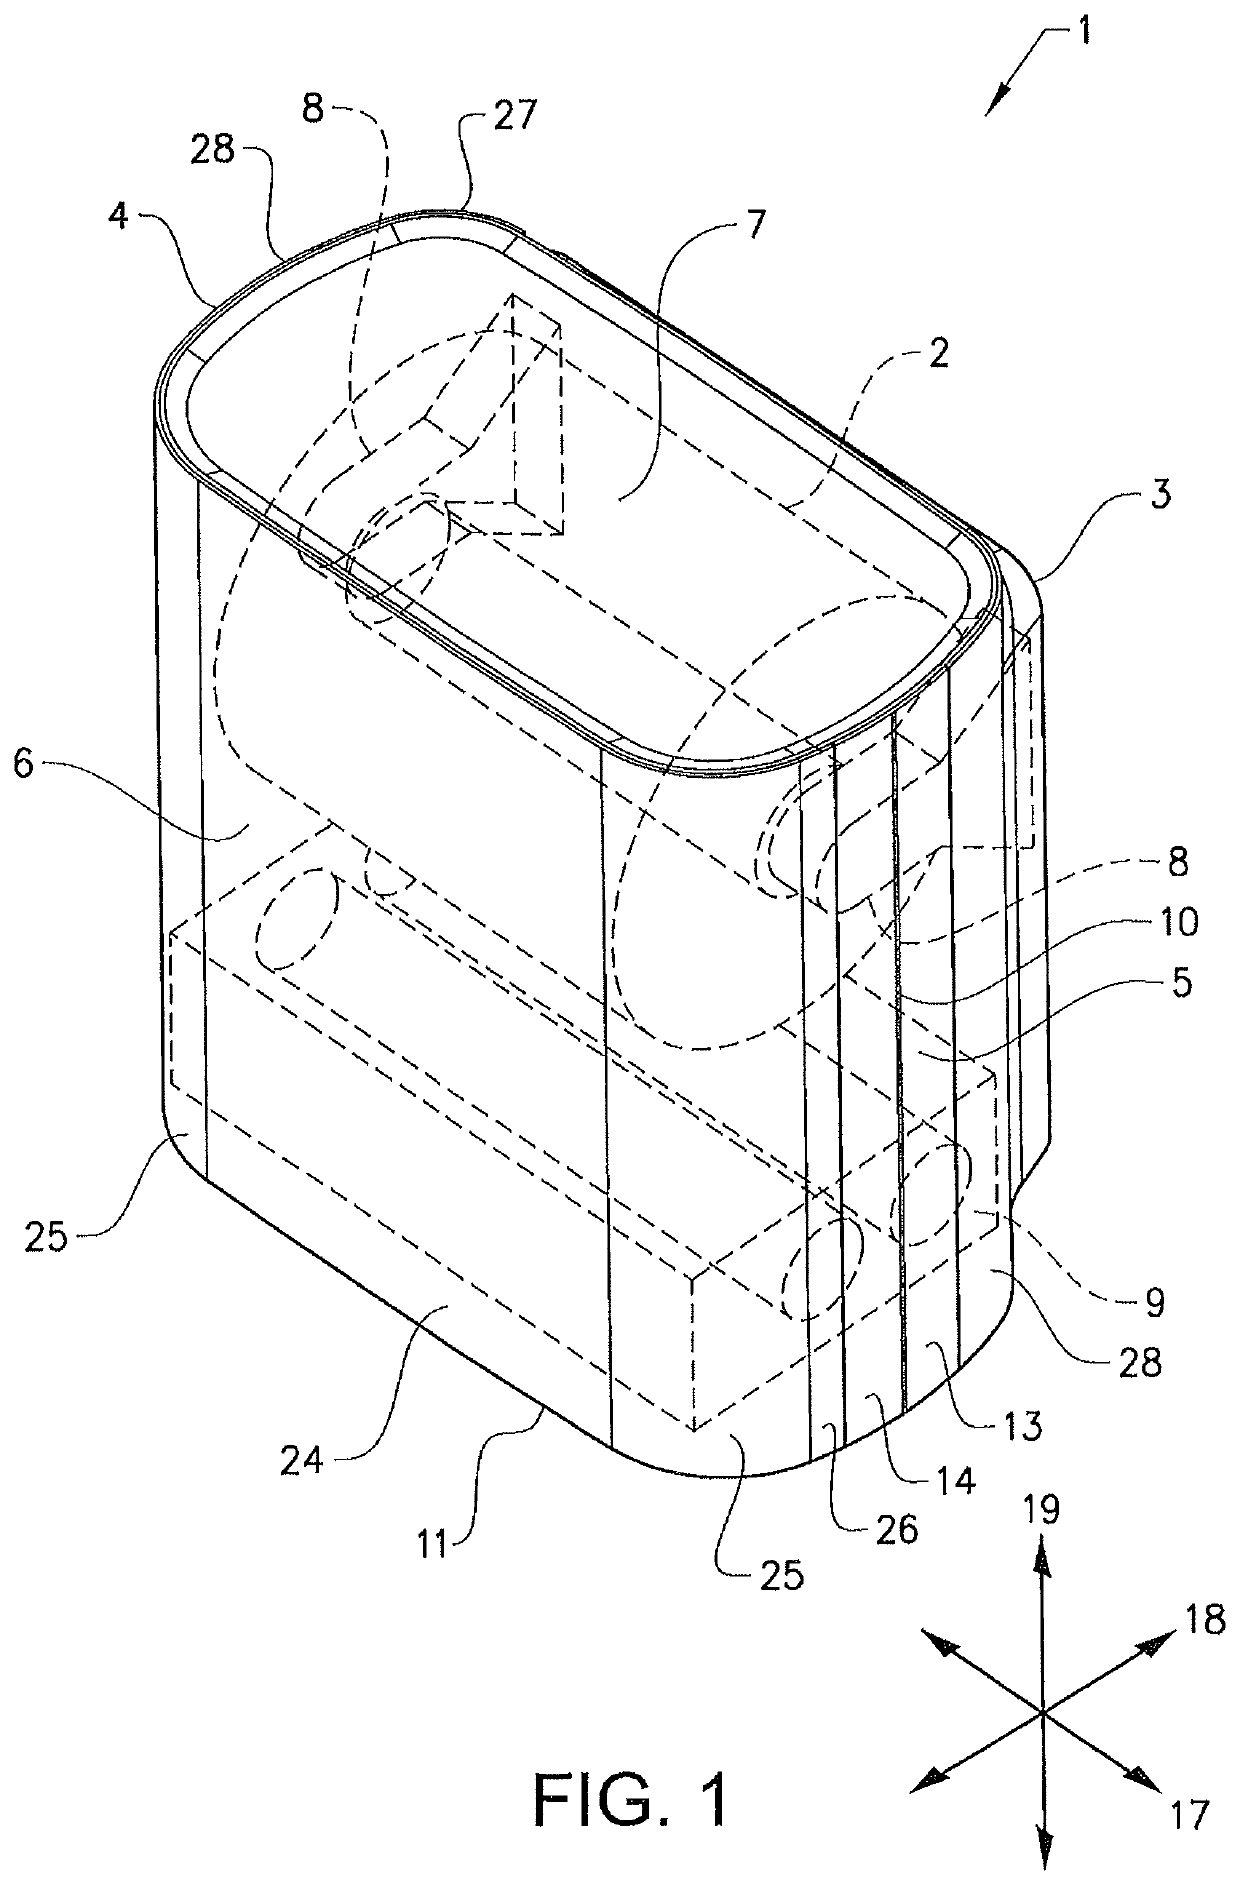 Dispenser for storing and dispensing hygiene products